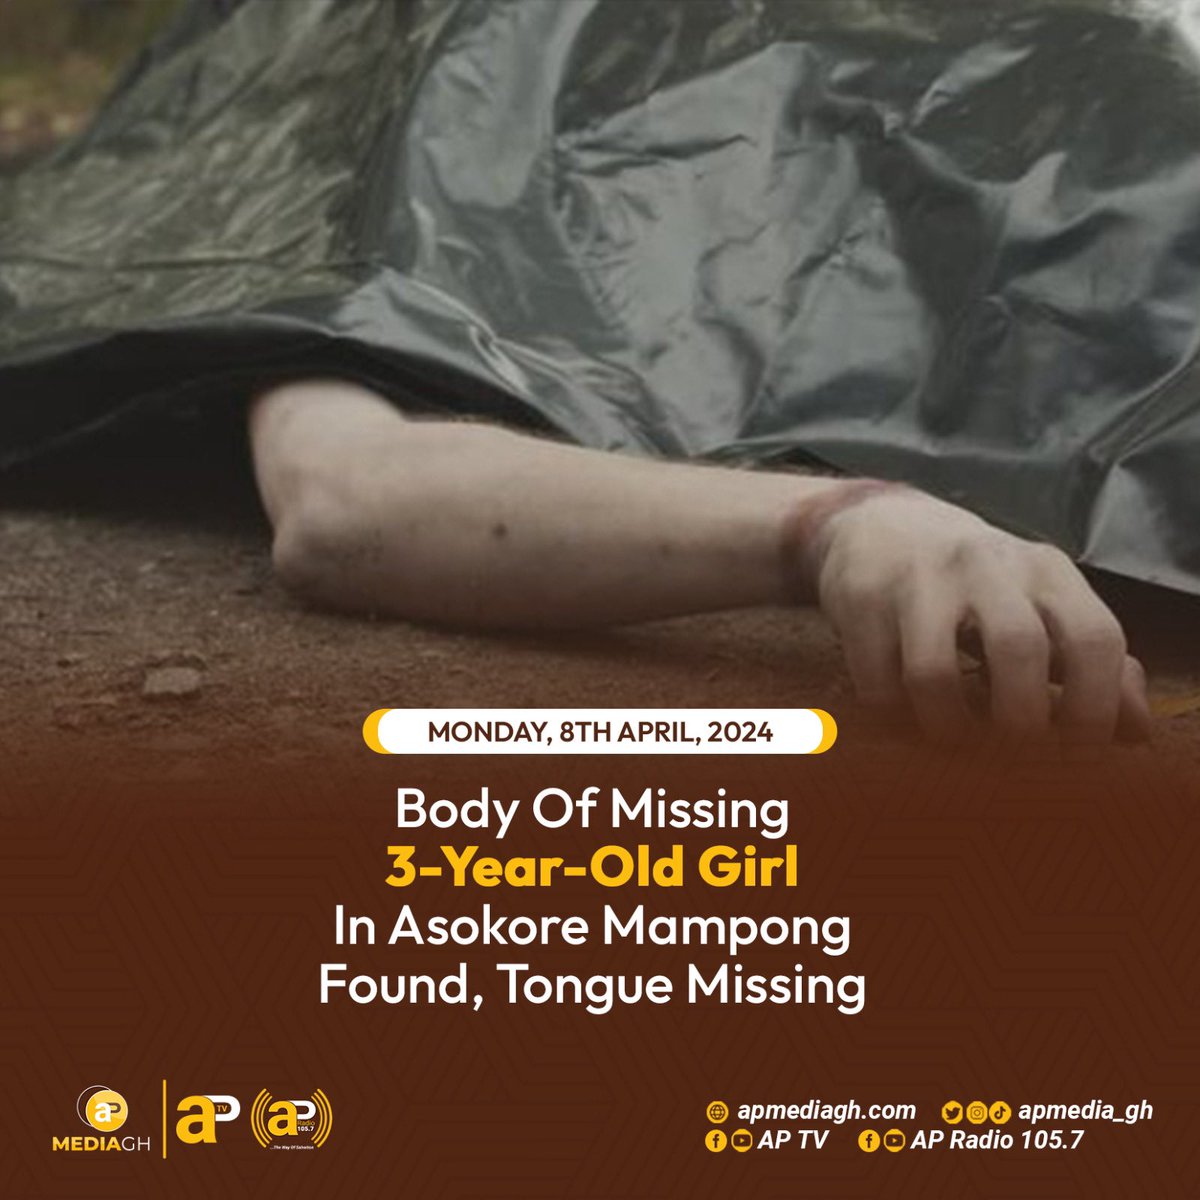 Body of missing 3-year-old girl in Asokore Manpong found, tongue missing 

#APTV #APNEWS